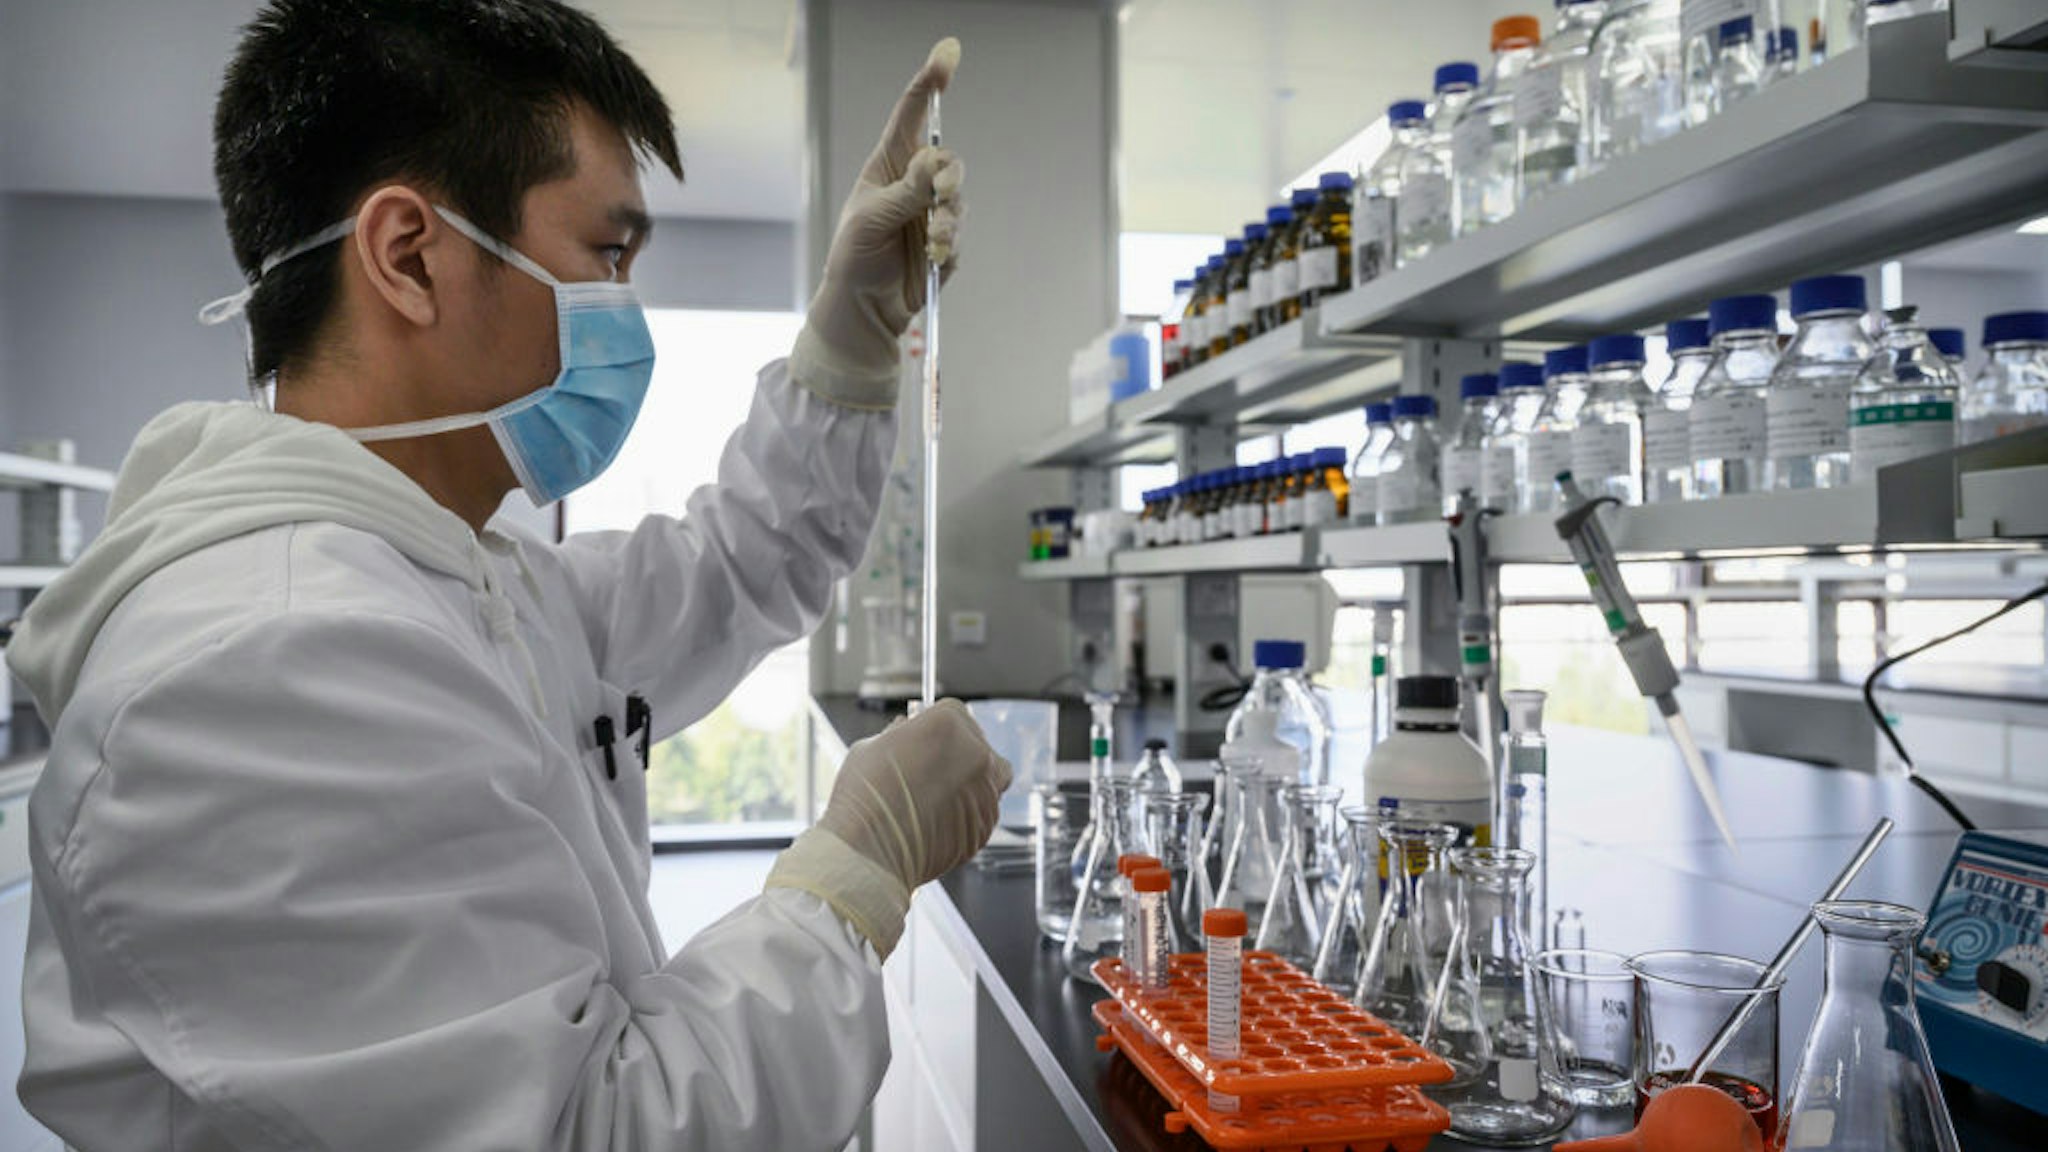 BEIJING, CHINA - SEPTEMBER 24: A technician works in a lab at Sinovac Biotech where the company is producing their potential COVID-19 vaccine CoronaVac during a media tour on September 24, 2020 in Beijing, China. Sinovacs inactivated vaccine candidate, called CoronaVac, is among a number of companies in the global race to control the coronavirus pandemic. The company is running Phase 3 human trials in four countries and ramping up production to 300 million doses per year at a new manufacturing facility south of Beijing. A lack of domestic coronavirus cases in China has meant that companies developing vaccines have shifted their focus overseas to conduct trials to gather the volume of data necessary to win regulatory approvals. When Chinas government launched an emergency use program in July to vaccinate groups of essential workers, Sinovacs chief executive says the company supplied tens of thousands of doses, even as trials are still underway. About 90% of Sinovacs employees have chosen to receive injections of CoronaVac, which is one of eight Chinese vaccine candidates in human trials. The company is also seeking approval to begin clinical trials with teenagers and children as young as age 3.(Photo by Kevin Frayer/Getty Images)